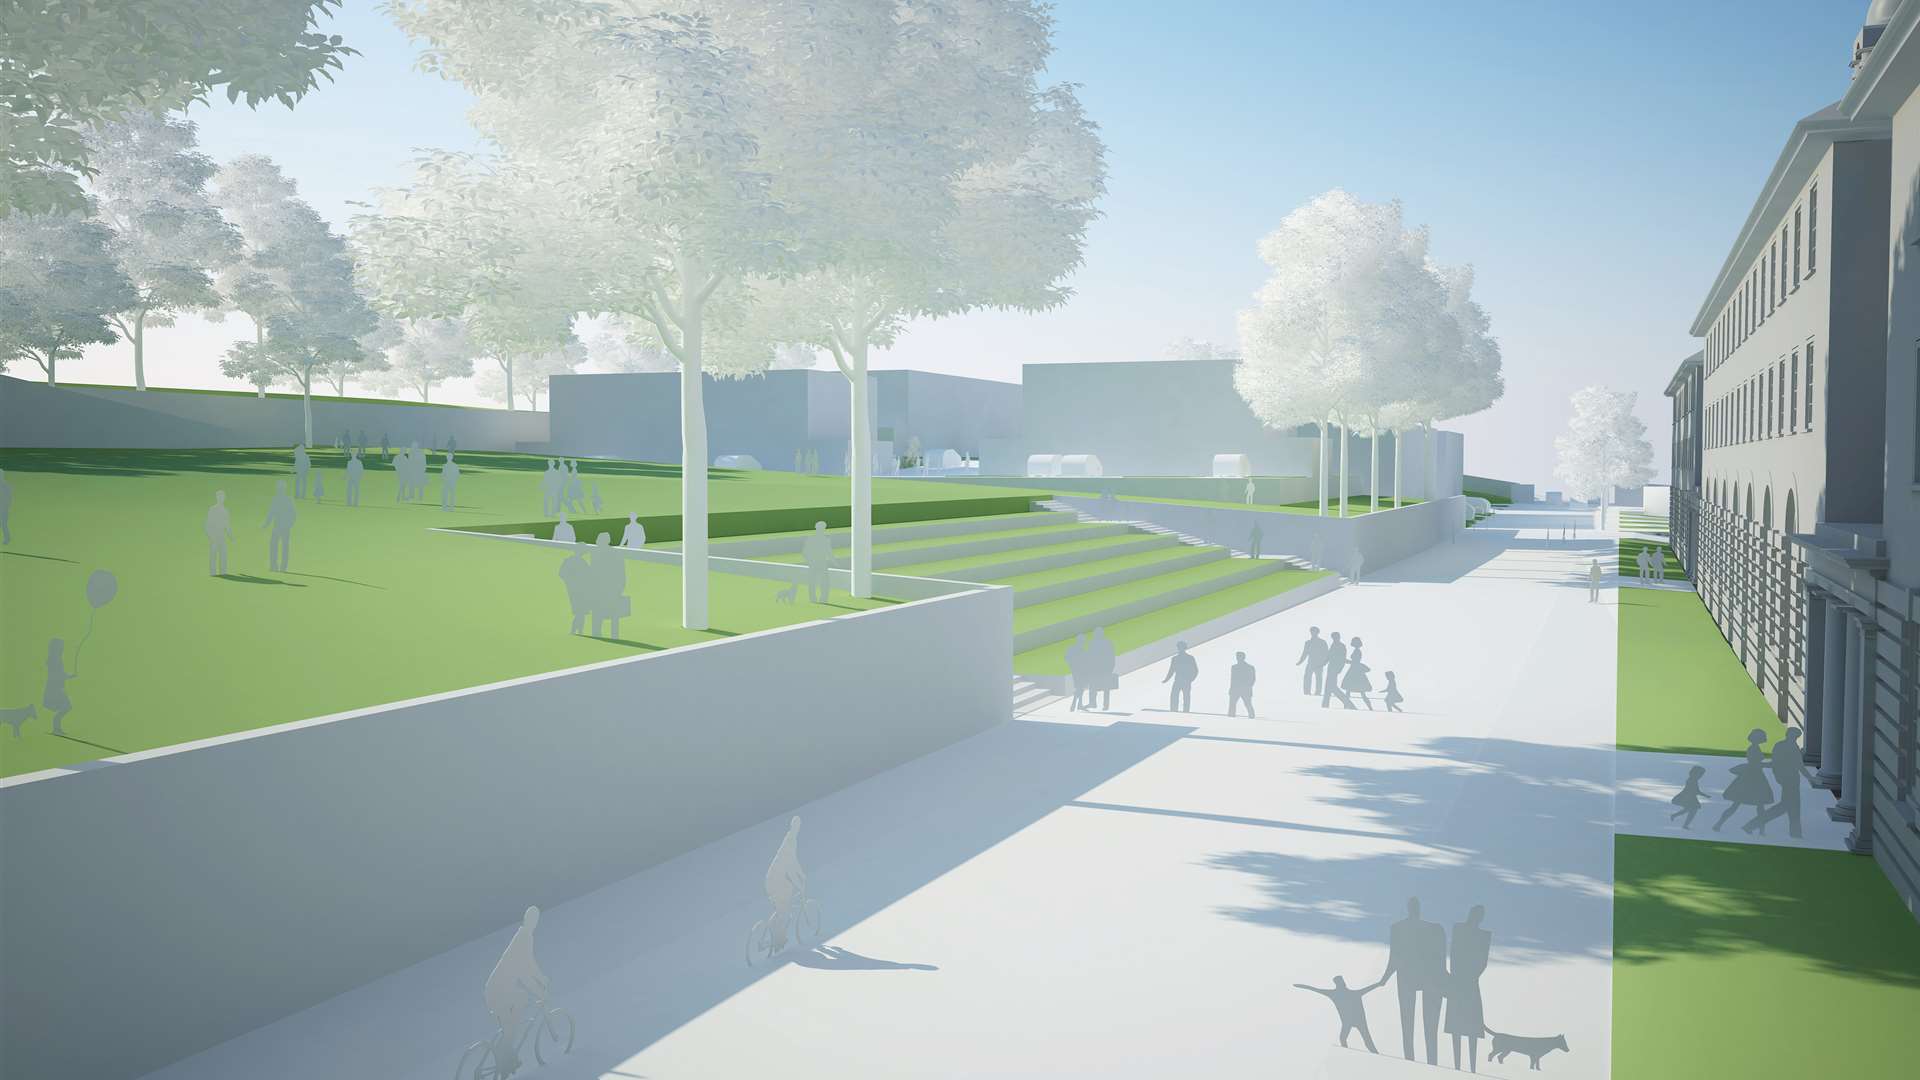 The parade ground will be turned into an open public space. Picture: Latis.